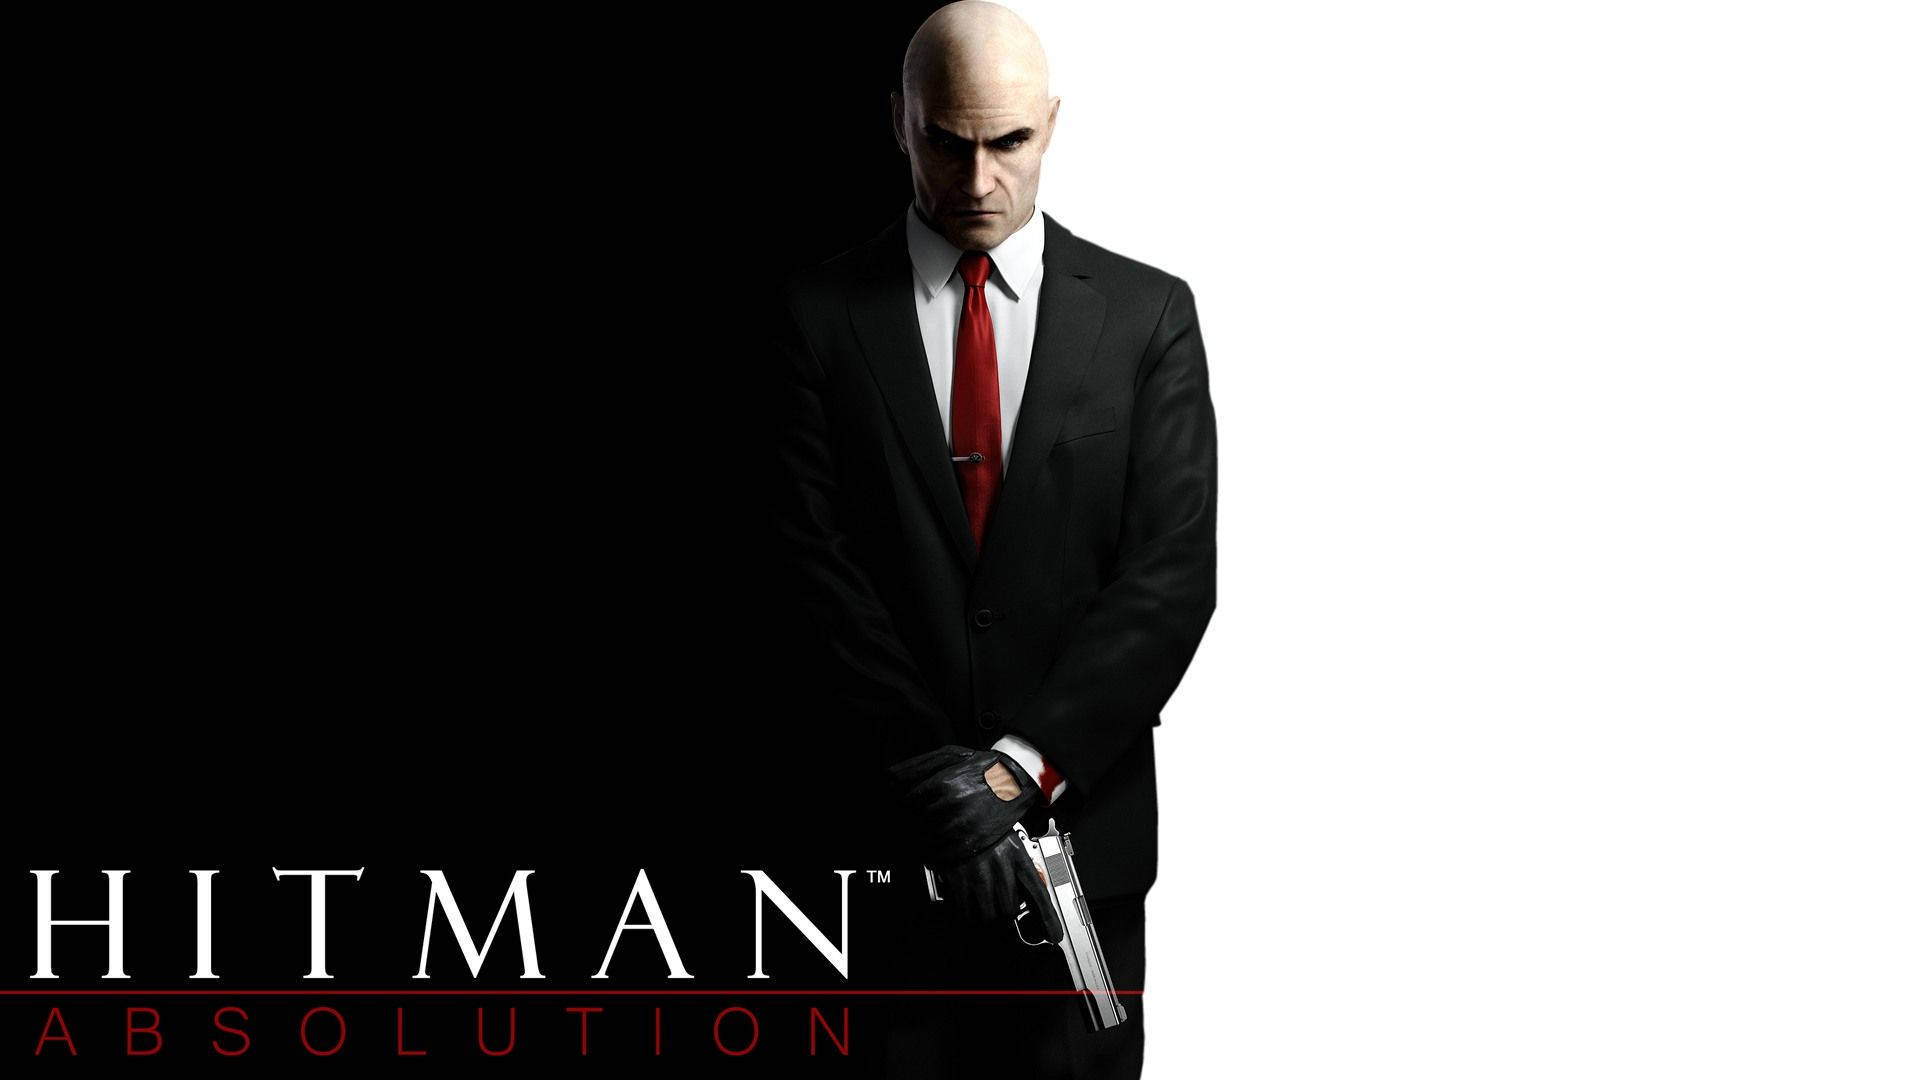 Feel the thrill of being an assassin with 'Hitman Black'. Wallpaper